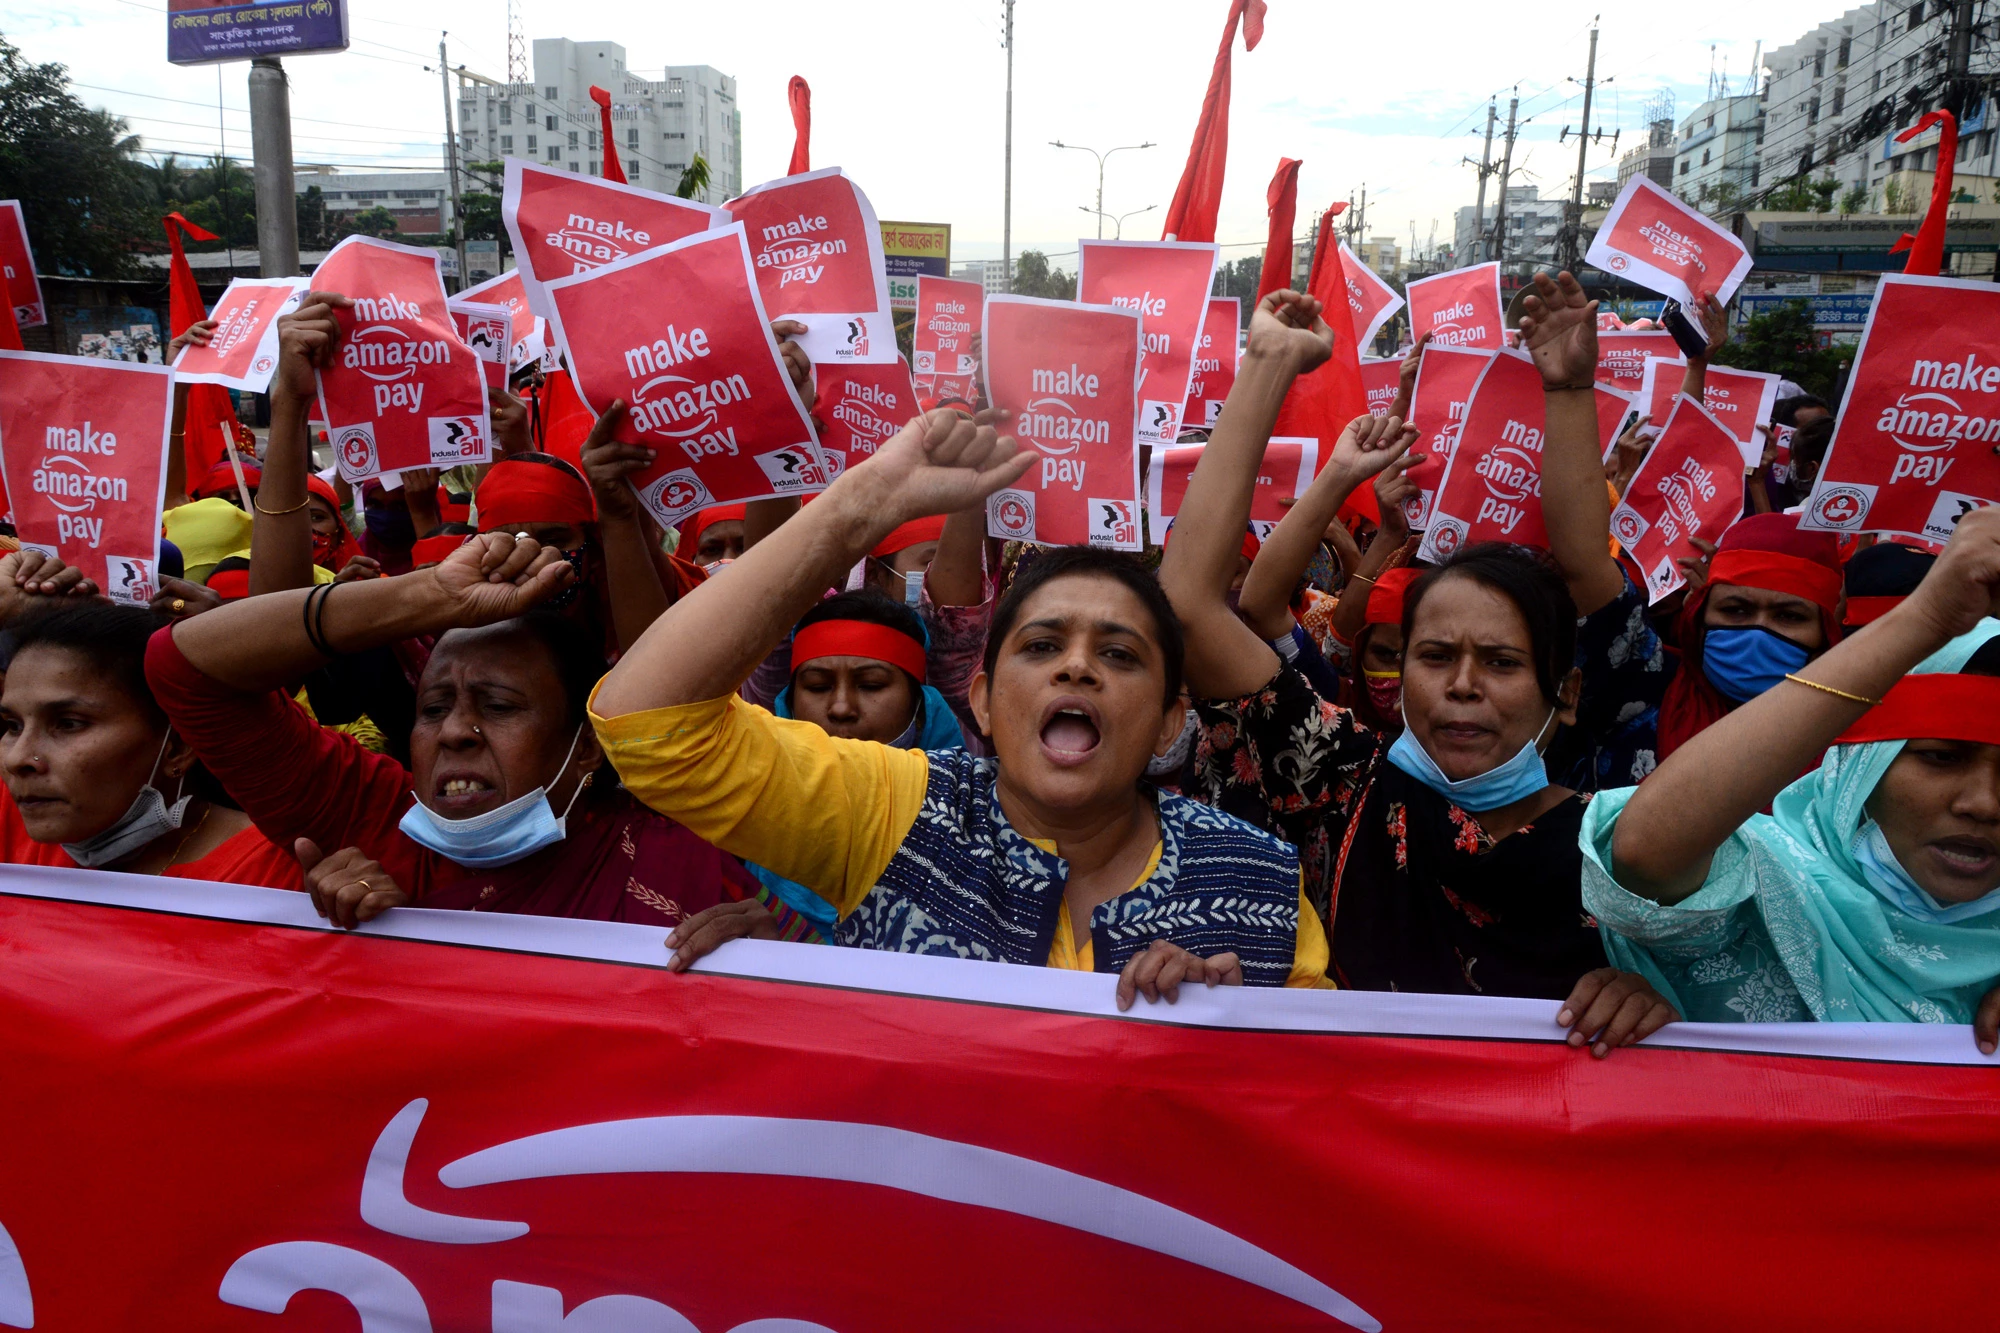 Activists of Sammilito Garments Sramik Federation (Combined Garments Workers Federation) stage a protest procession against the world's leading digital retailer Amazon.com demanding fair wages and union rights for all Amazon supply chain workers in Dhaka, Bangladesh, on November 27, 2020 (Photo by Mamunur Rashid/NurPhoto via Getty Images)